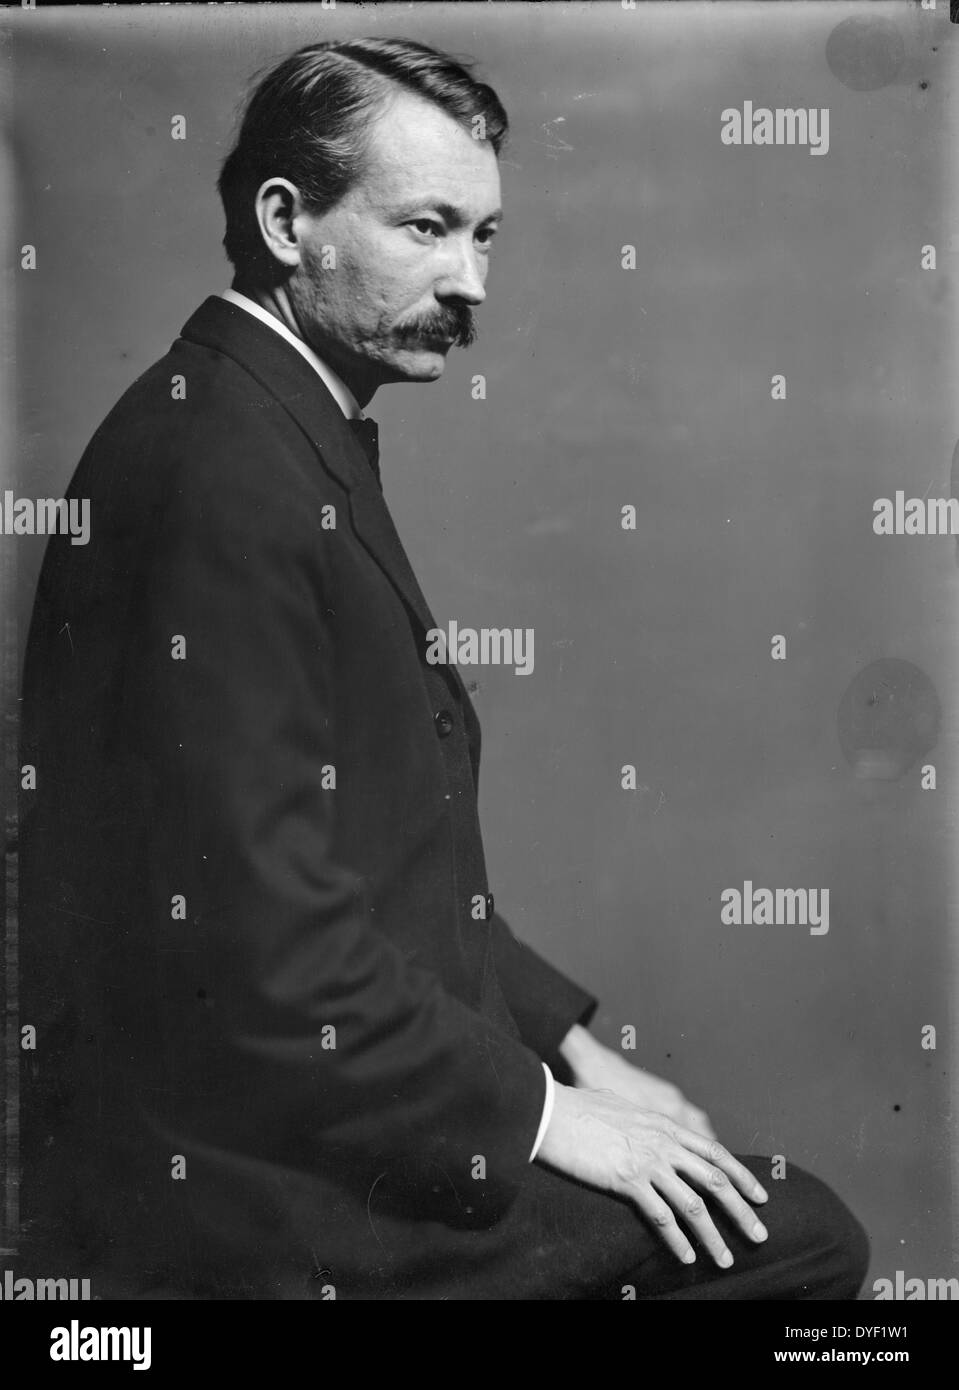 Robert Henri (1865-1929), the American painter, posed in the photographer's New York City studio about 1900] By Gertrude Käsebier, 1852-1934, photographer [ca. 1900] Stock Photo